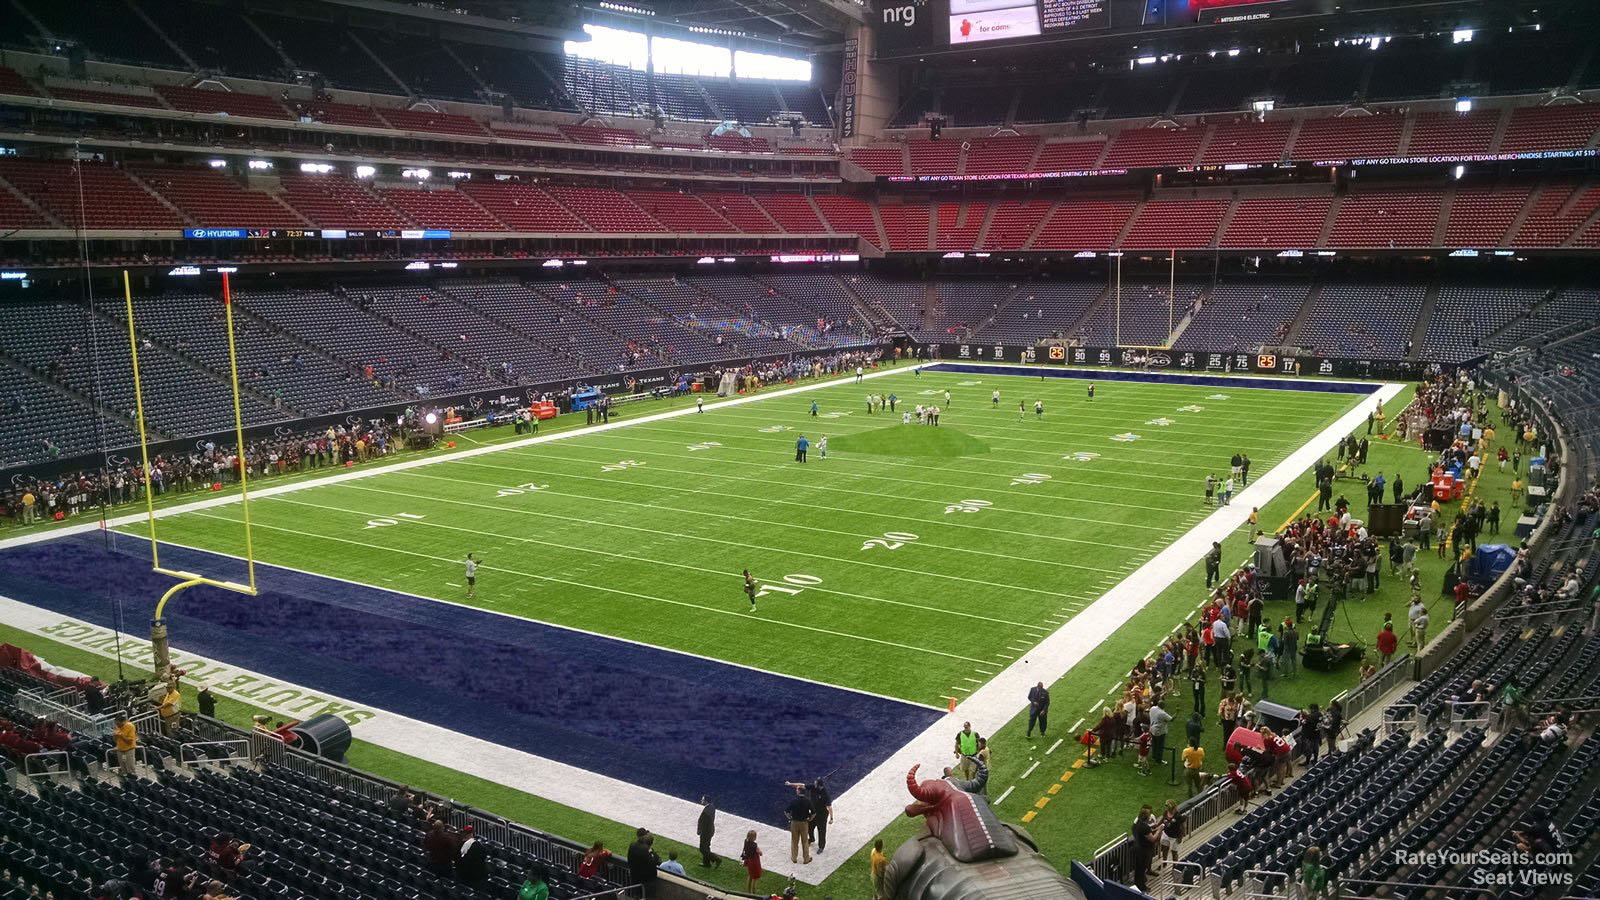 section 319, row a seat view  for football - nrg stadium